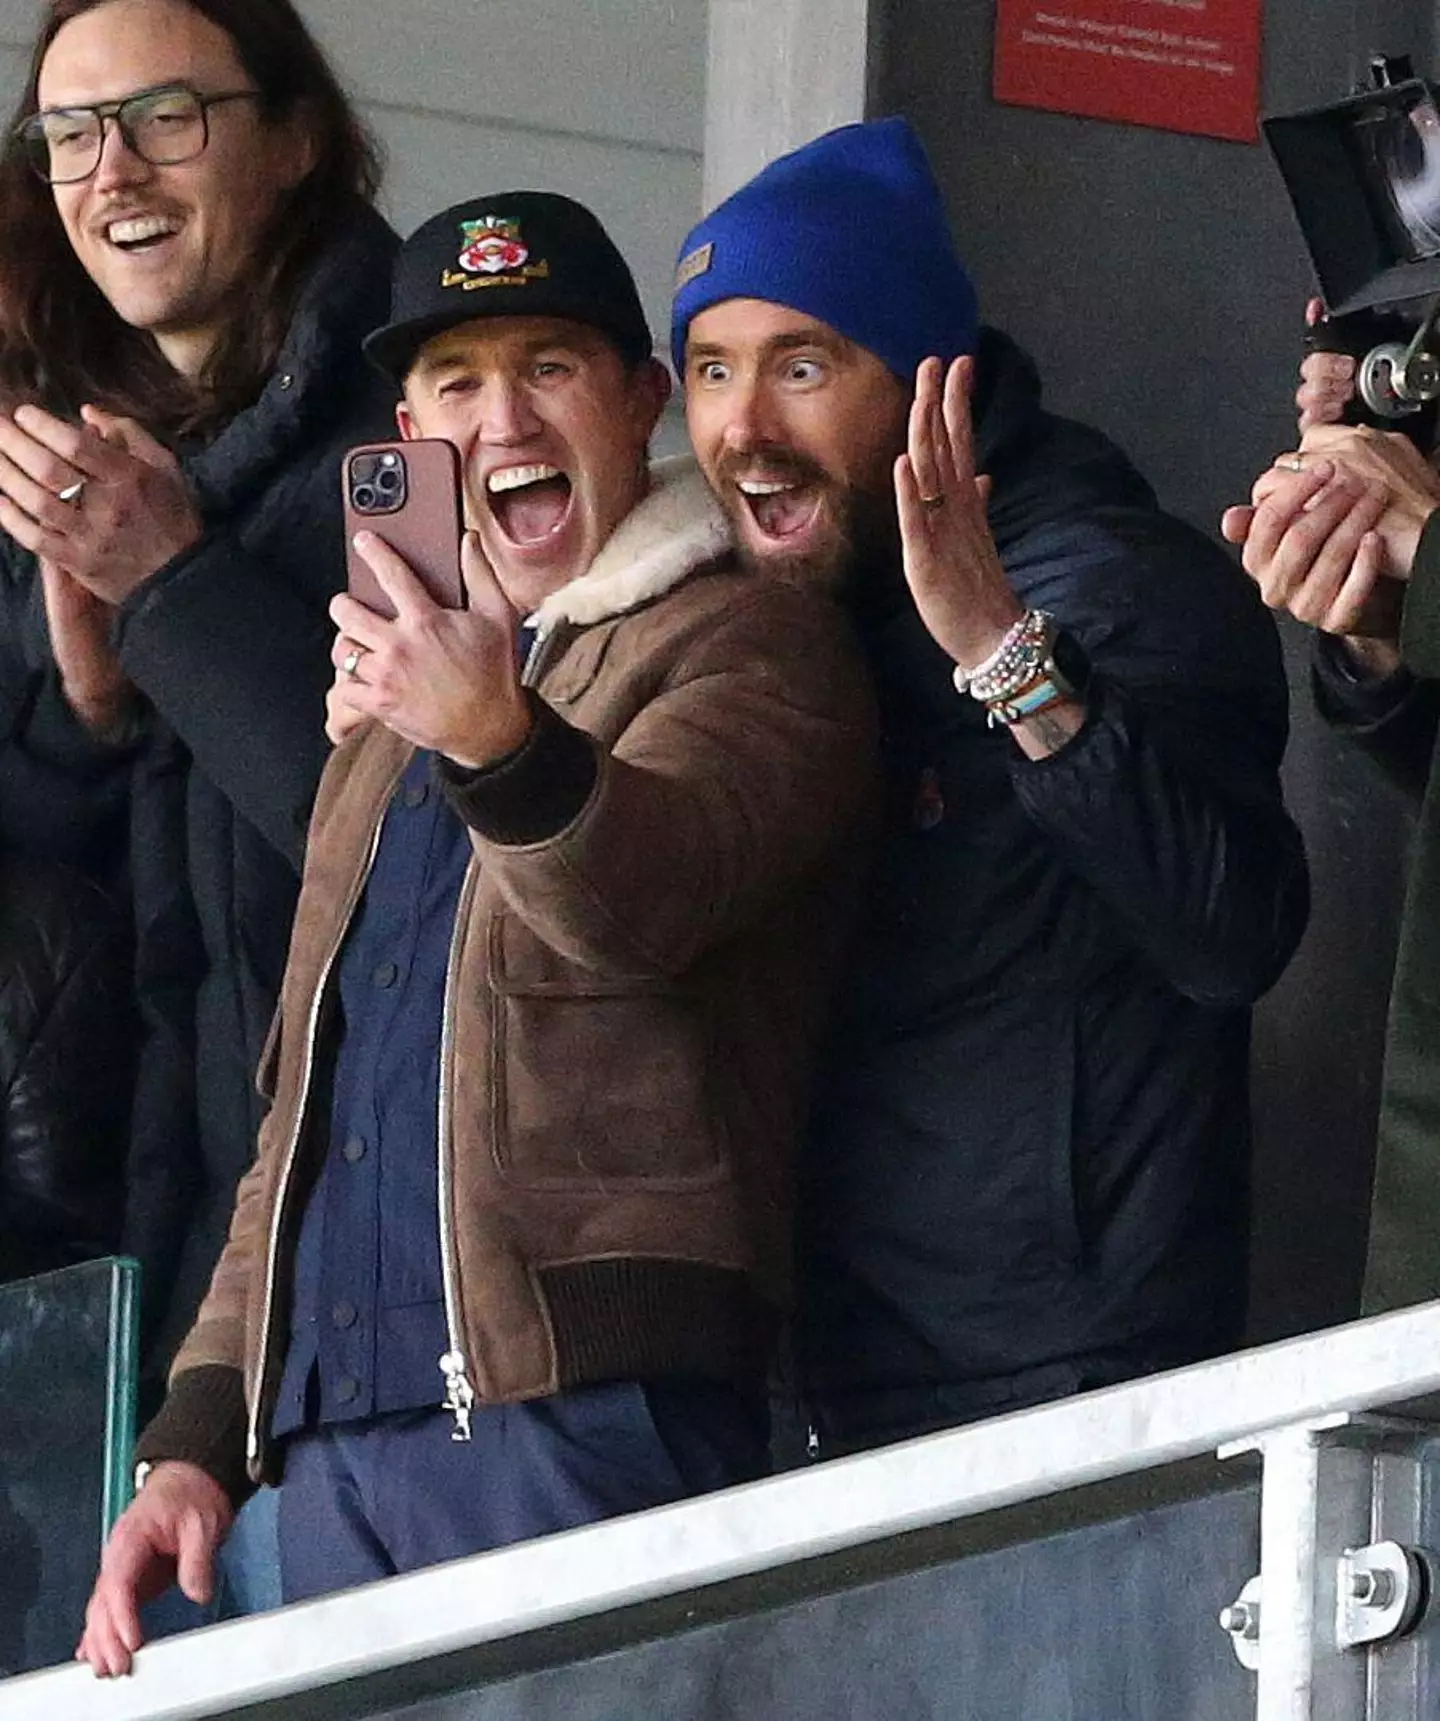 Owners Ryan Reynolds and Rob McElhenney were over the moon.